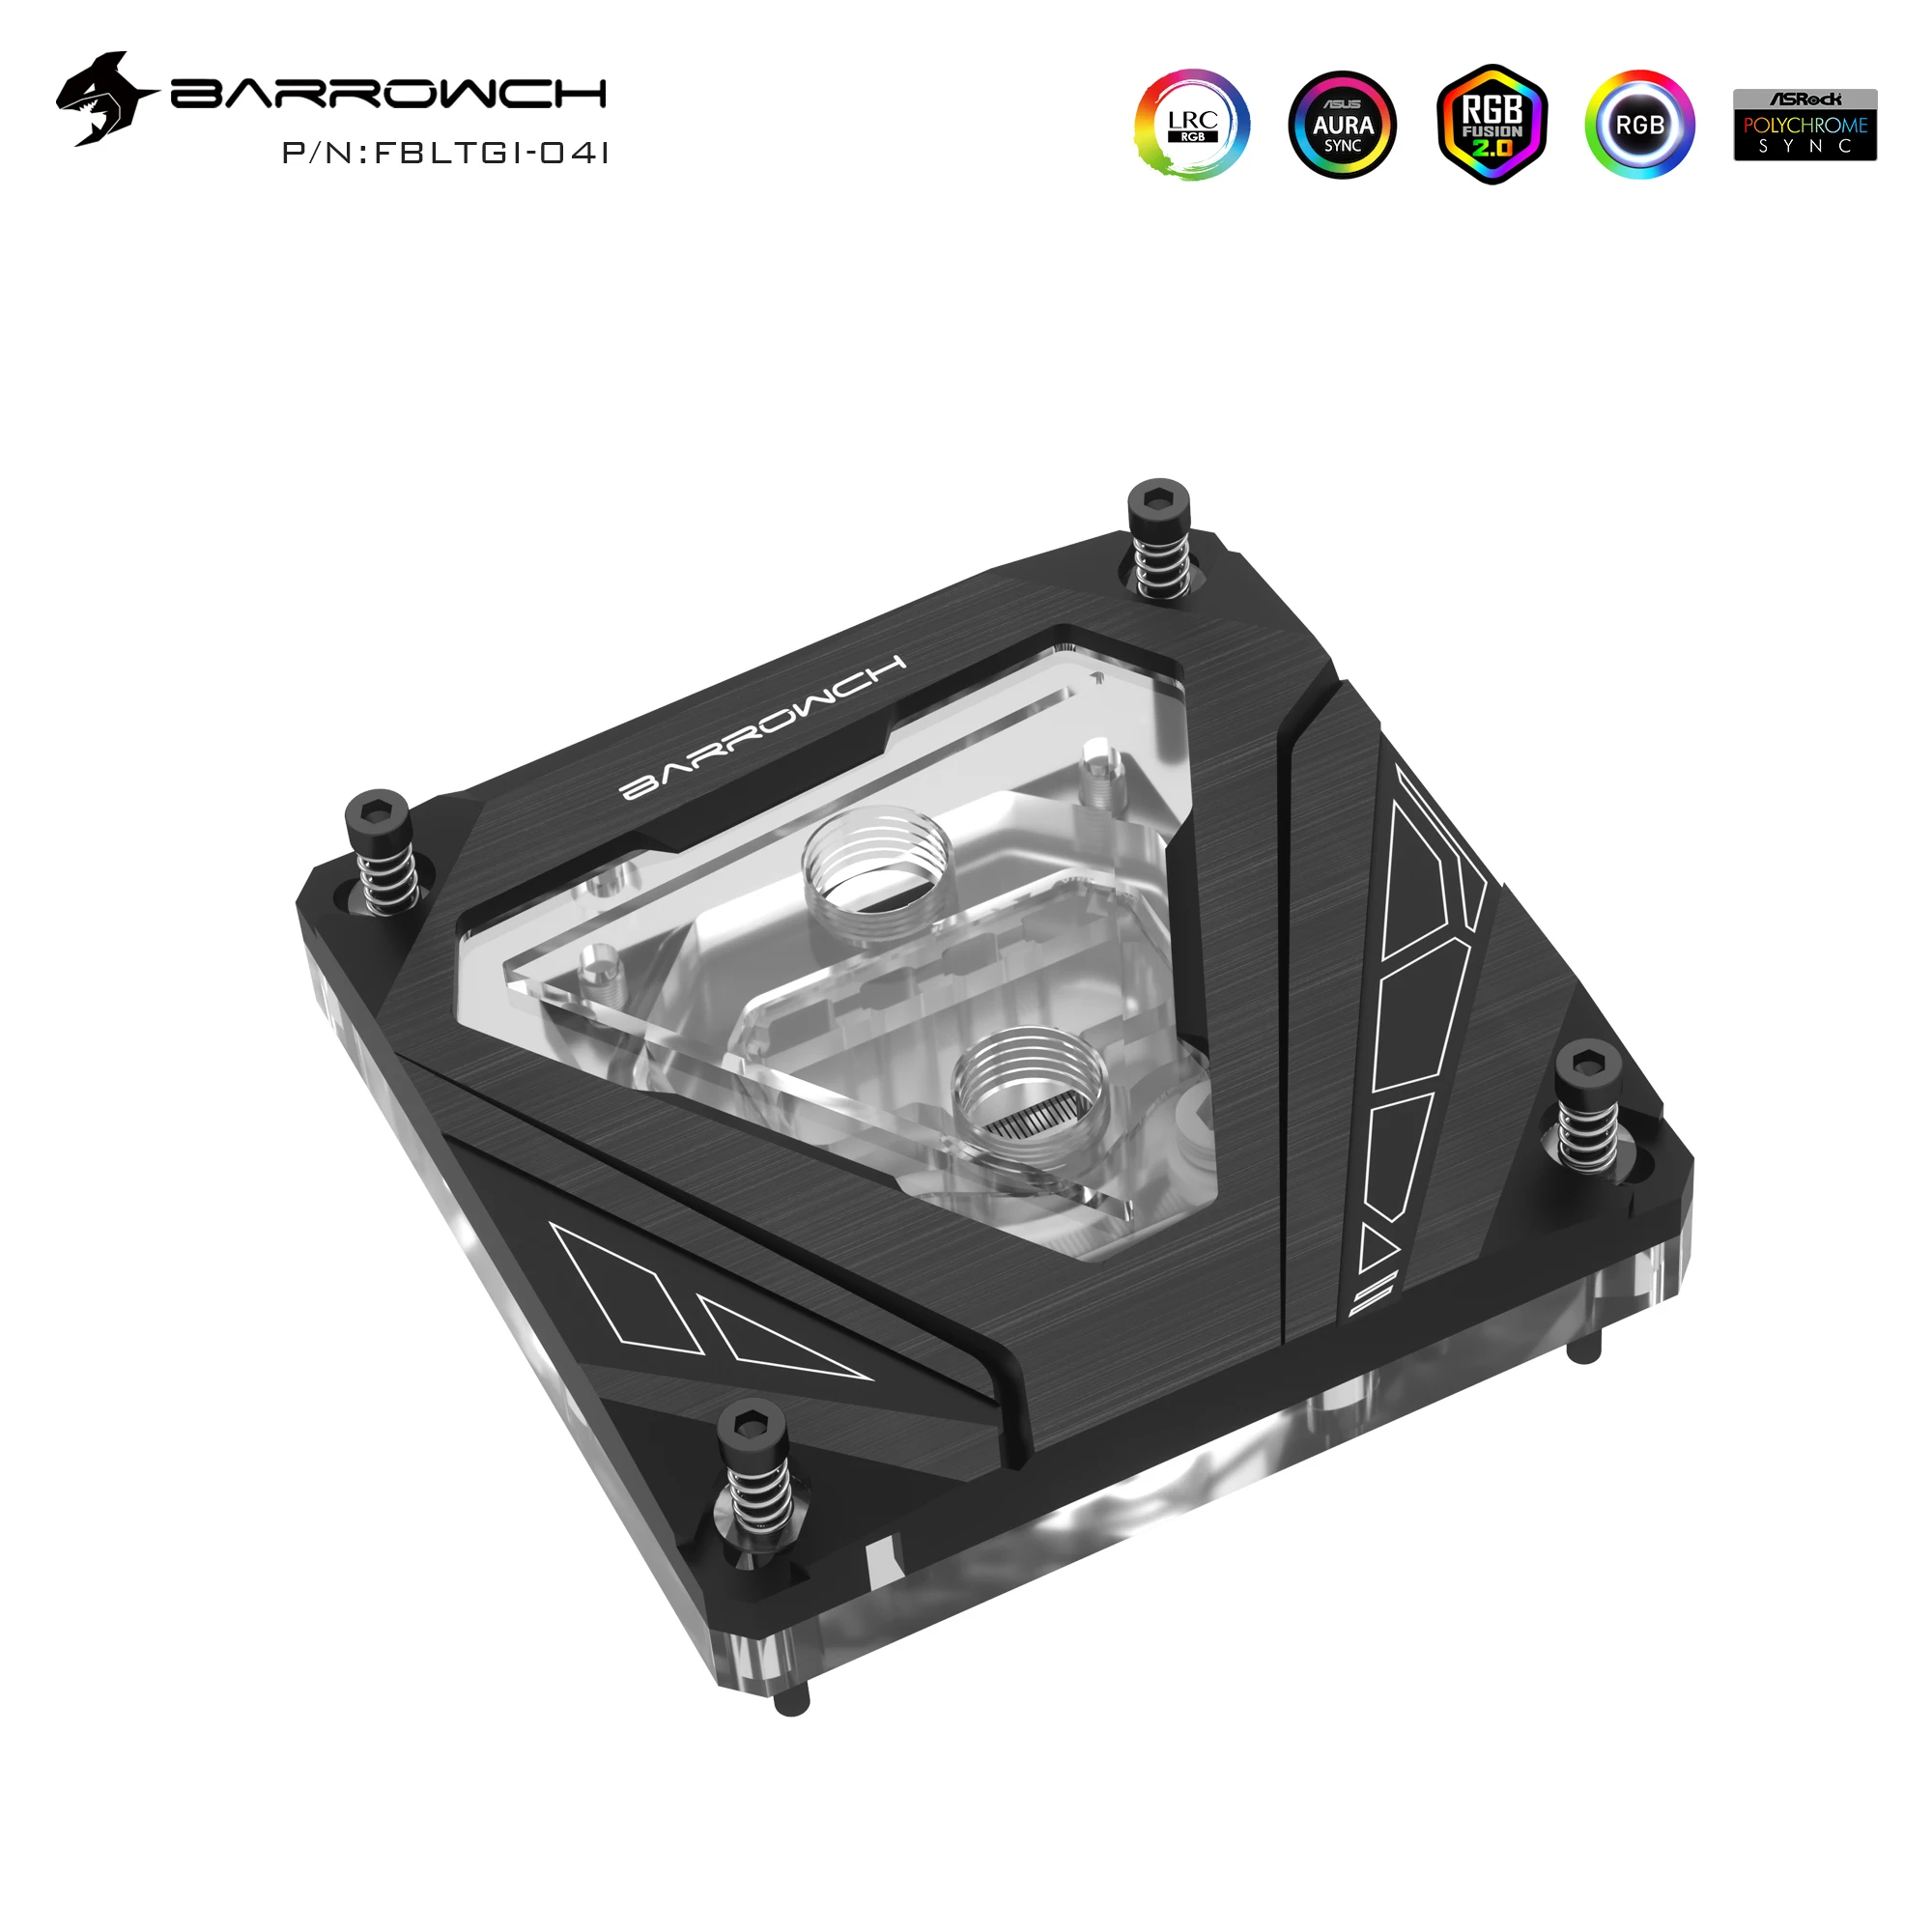 Barrowch CPU Water Cooling Block M Series for Intel 1700/115X/X99/x299 Future Mechanical Style Liquid Cooling Cooler,FBLTGI-04I enlarge